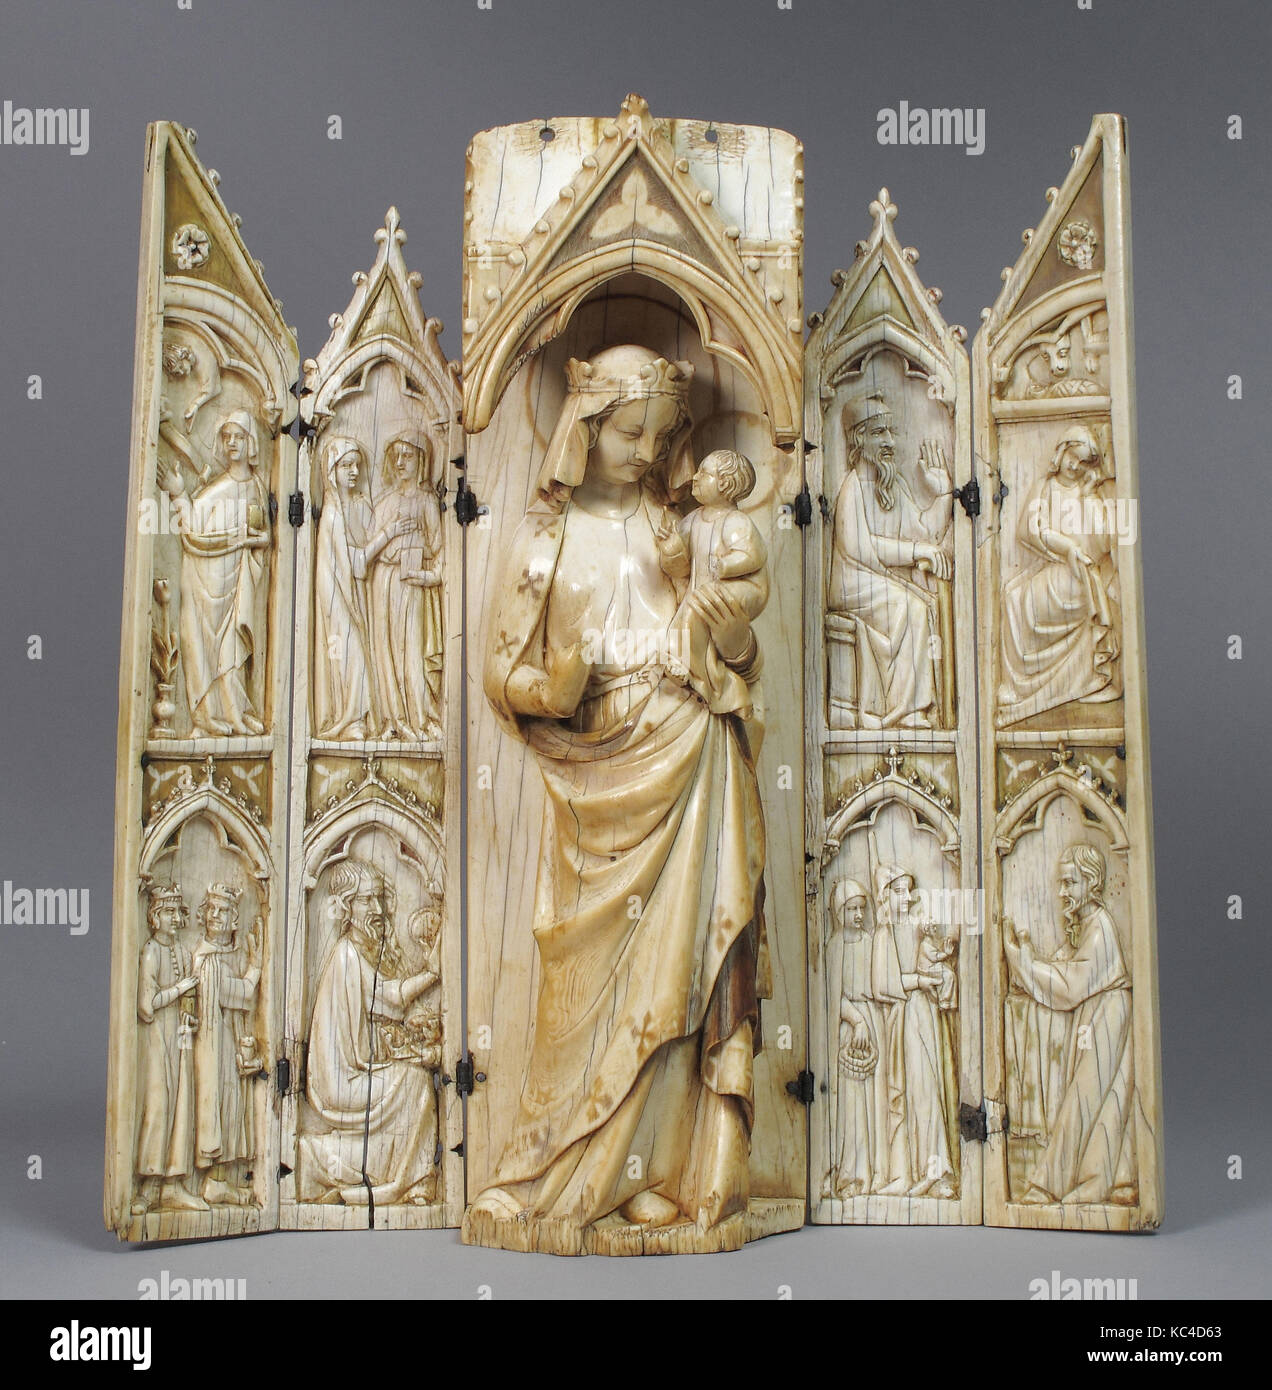 Tabernacle or Folding Shrine, 14th century, French, Ivory with metal mounts, Overall: 9 9/16 x 8 1/2 x 1 3/4 in. (24.3 x 21.6 x Stock Photo